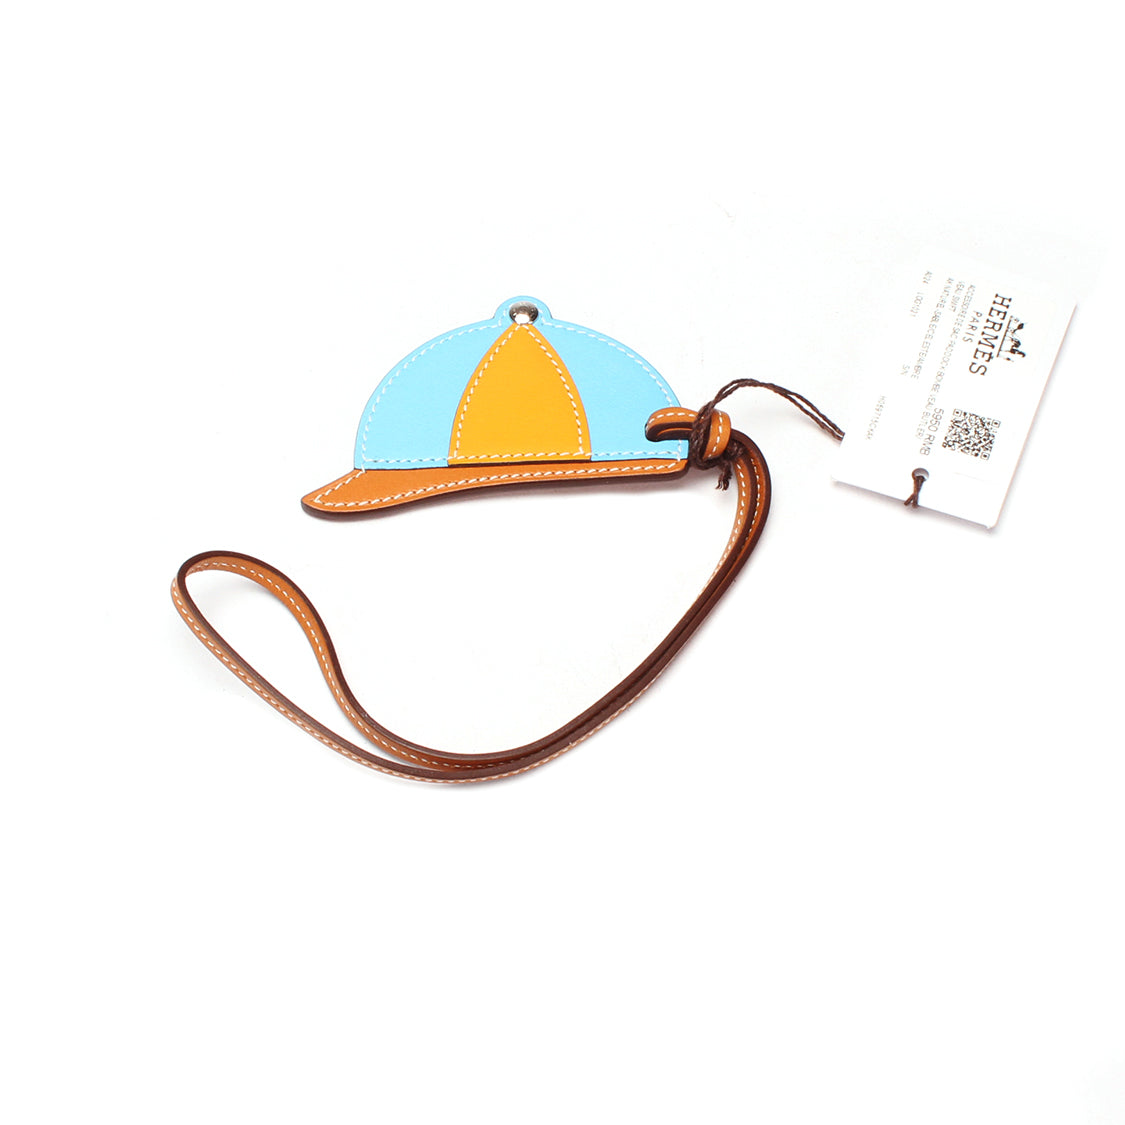 Hermes Bombe Helmet Leather Bag Charm Leather Other H069715CKAK in Excellent condition